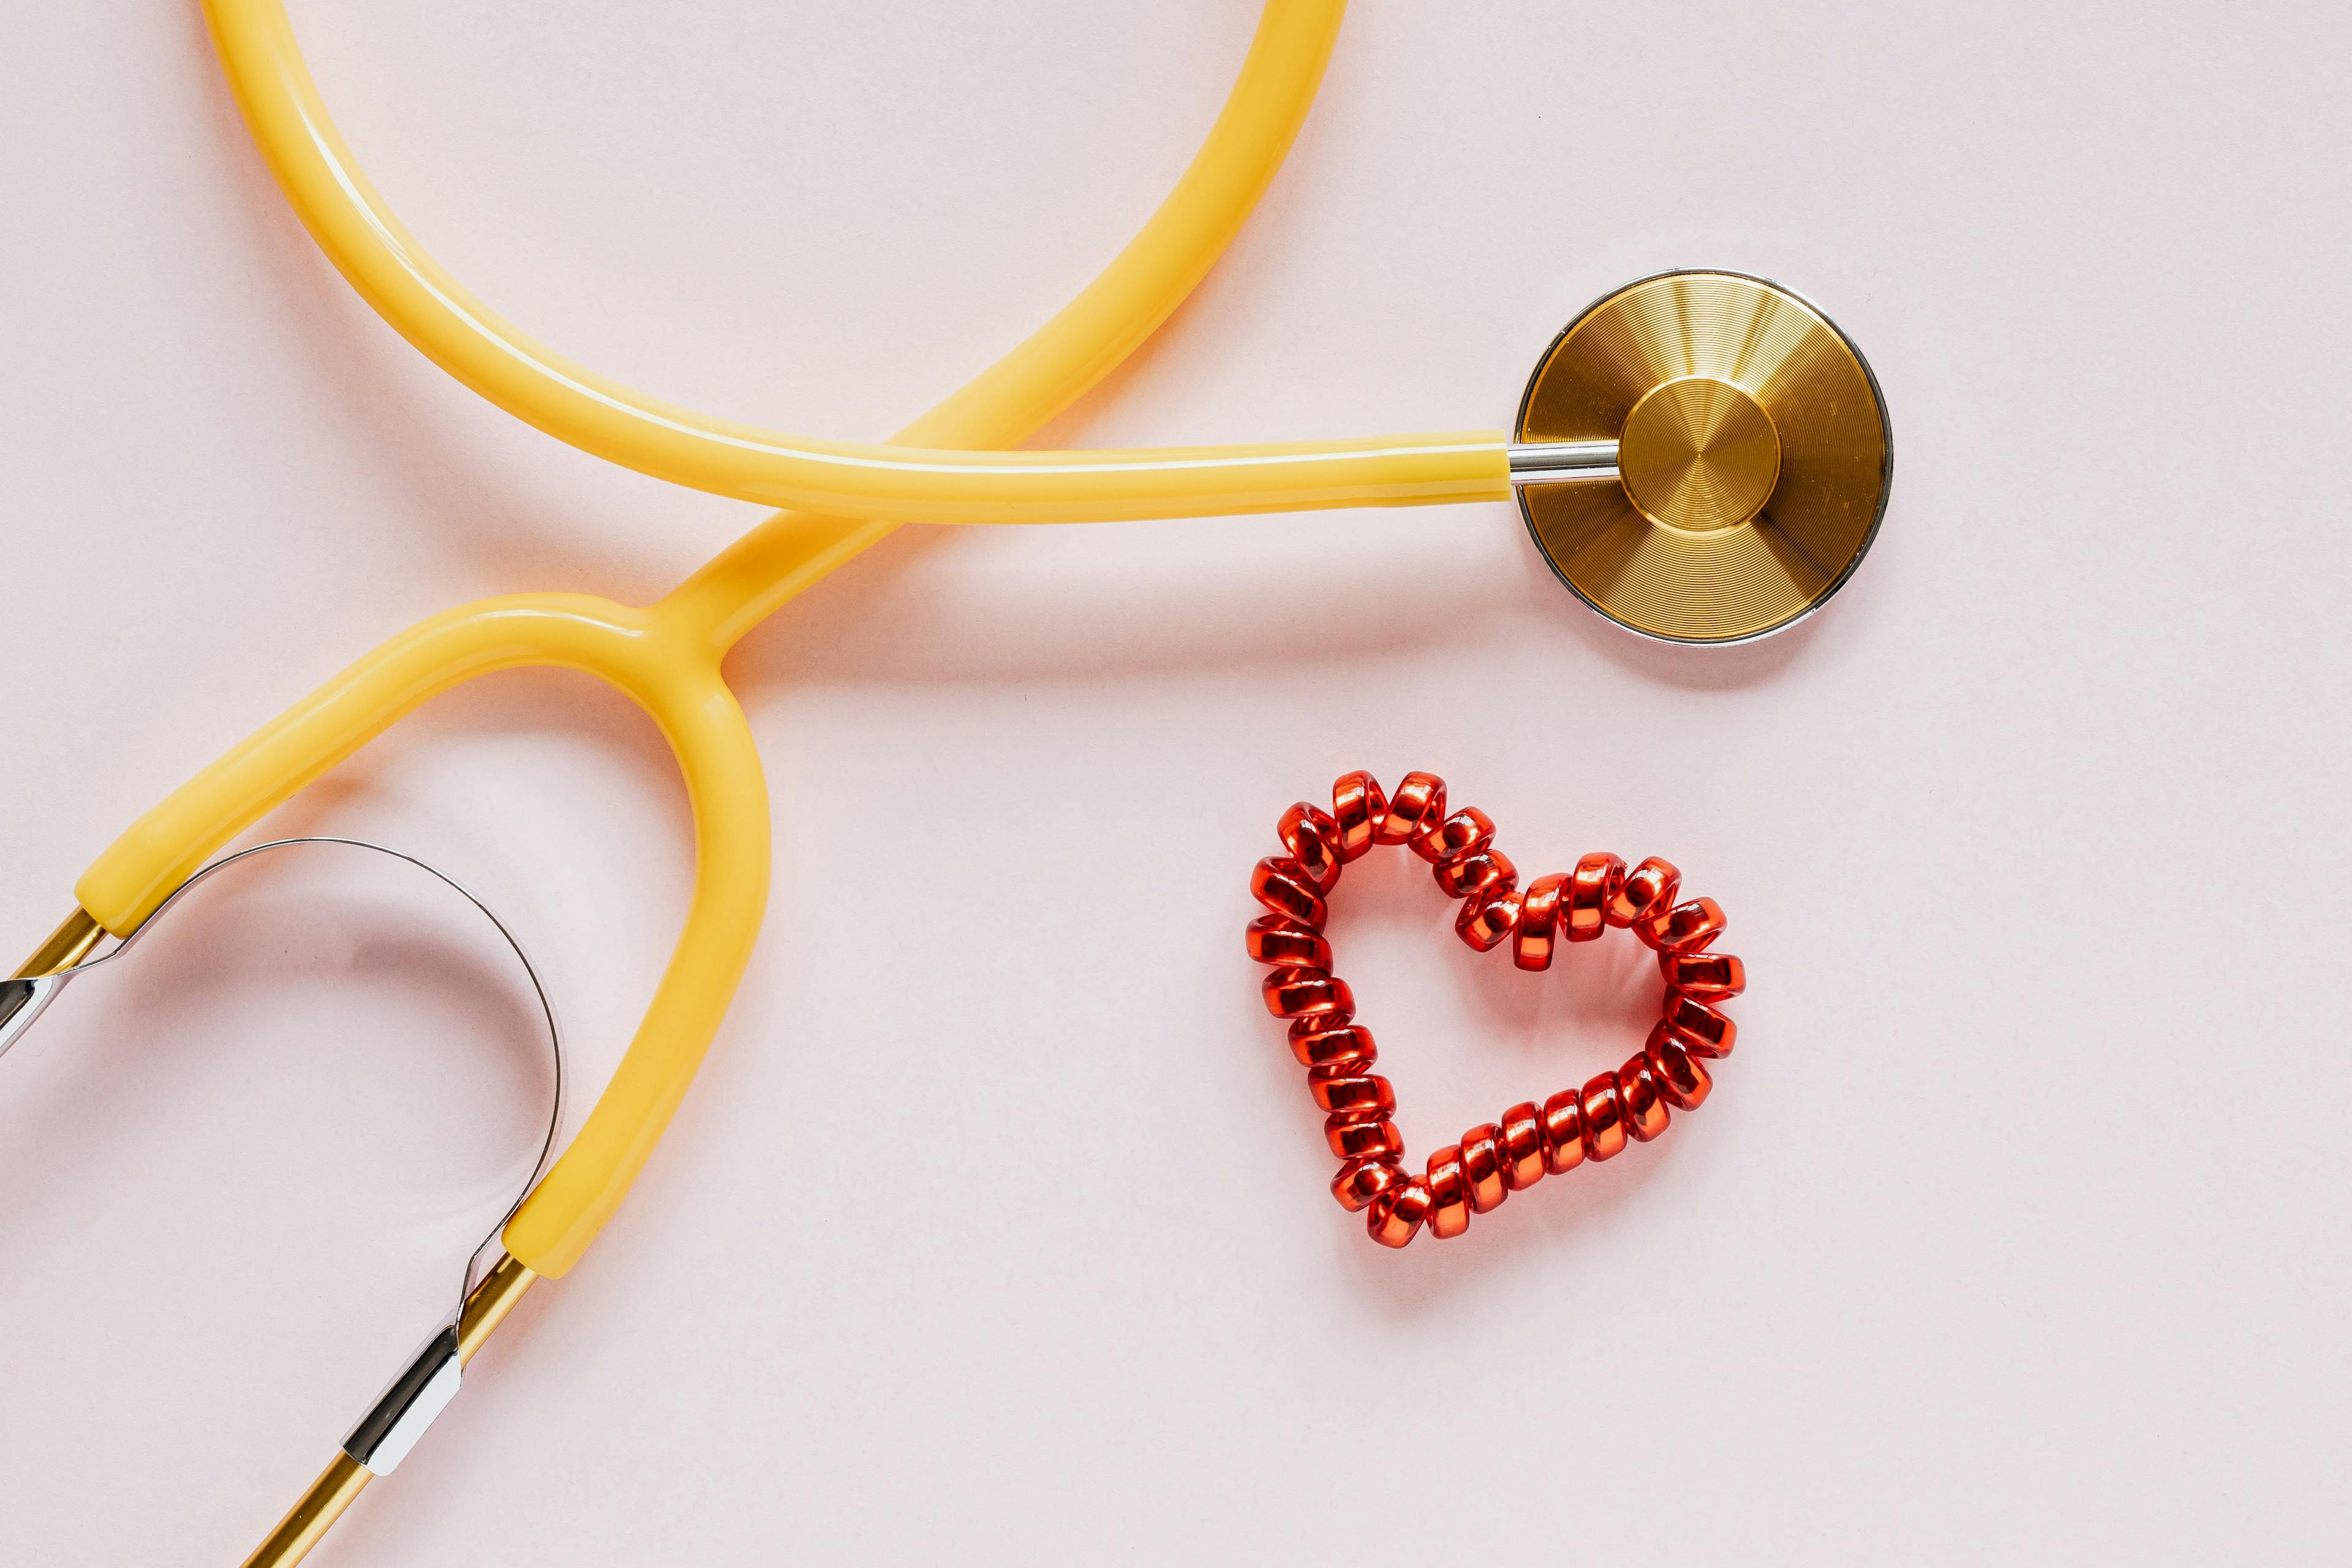 Stethoscope and heart.